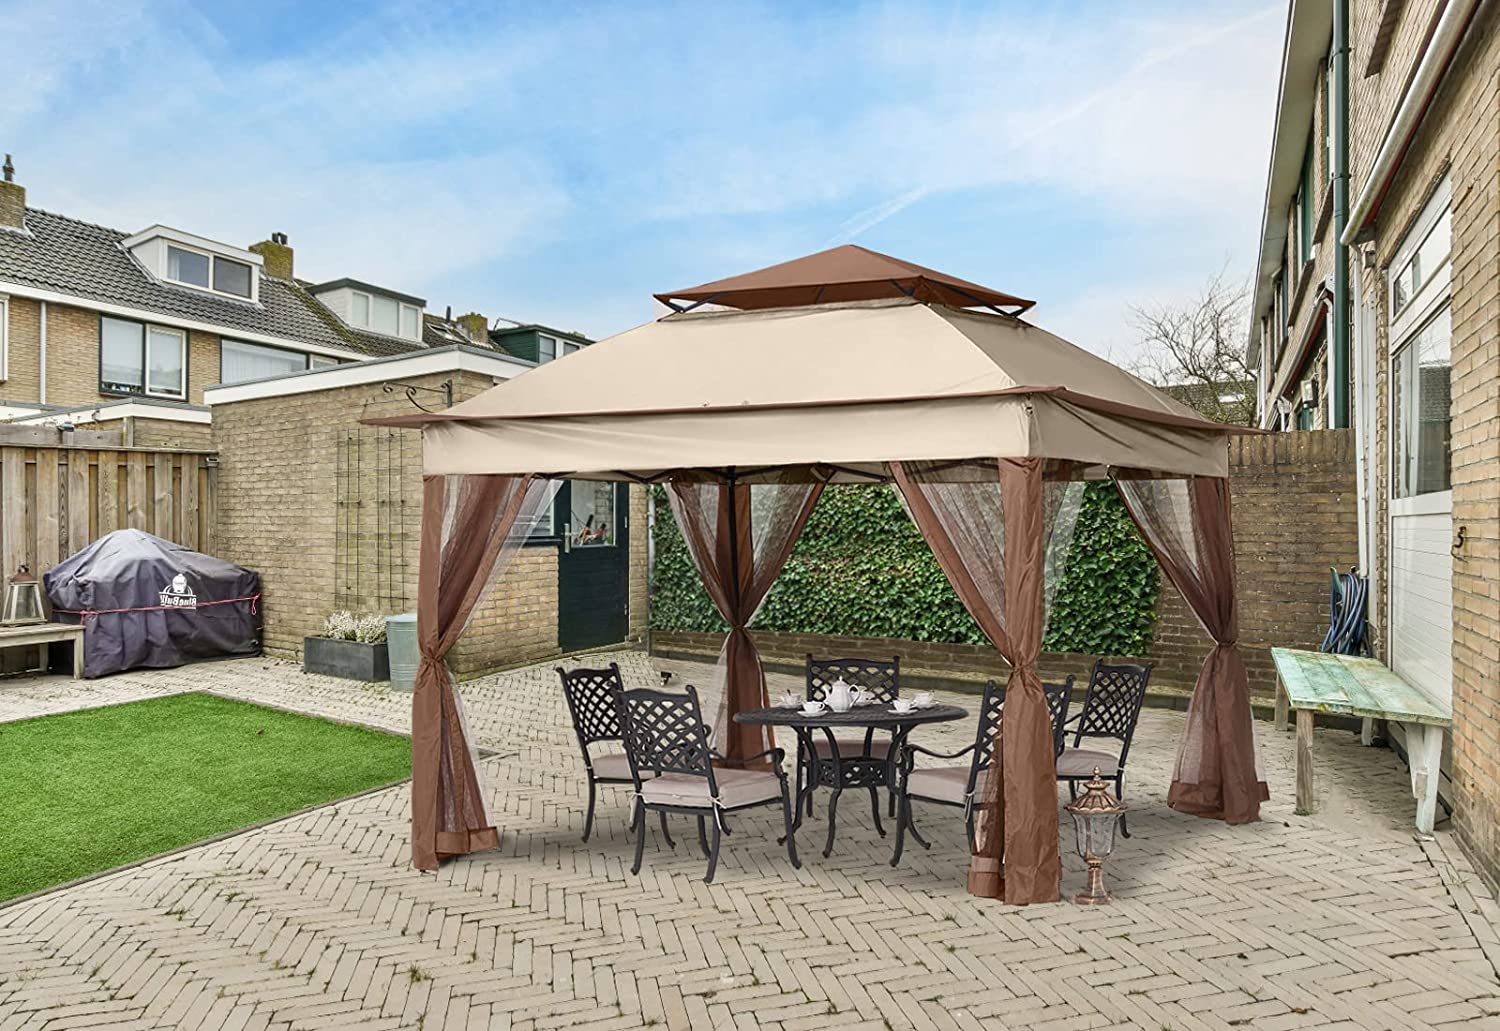 Review For MasterCanopy's Pop Up Gazebo West Midlands